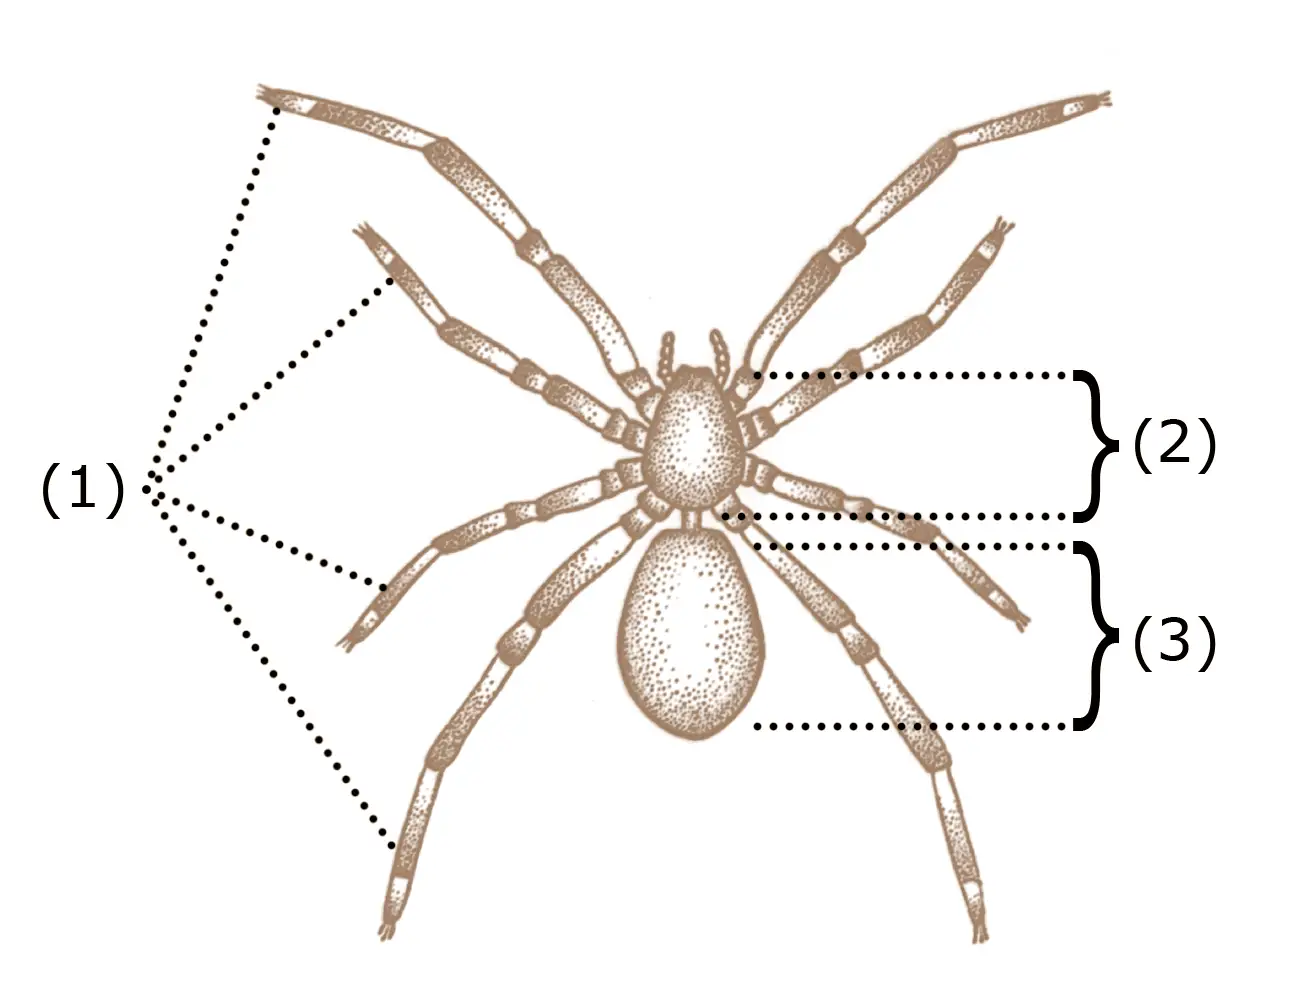 Anatomy And Physical Features Of Spiders